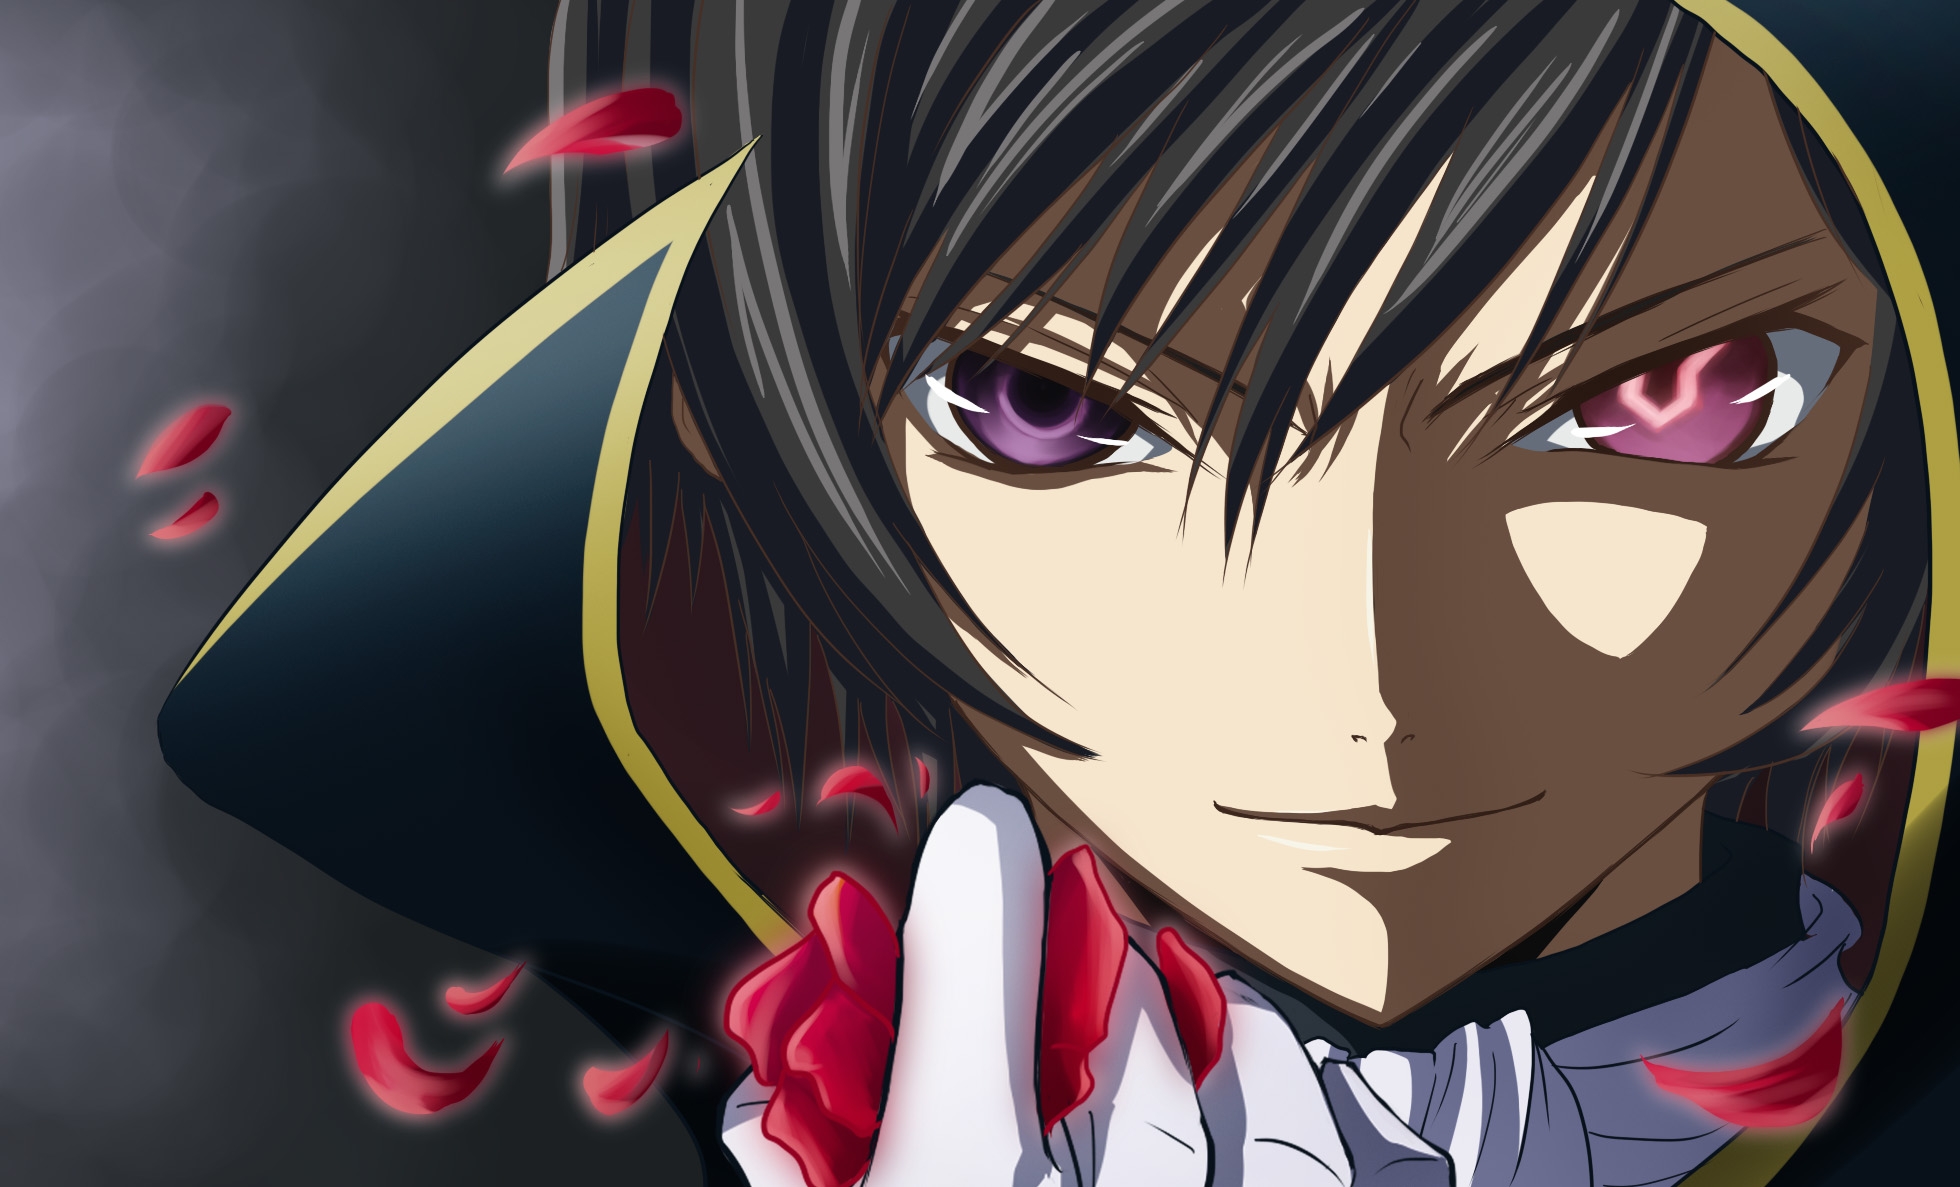 Free Download Code Geass Hd Wallpapers 1960x1187 For Your Desktop Mobile Tablet Explore 76 Lelouch Wallpaper Code Geass Lelouch Wallpaper